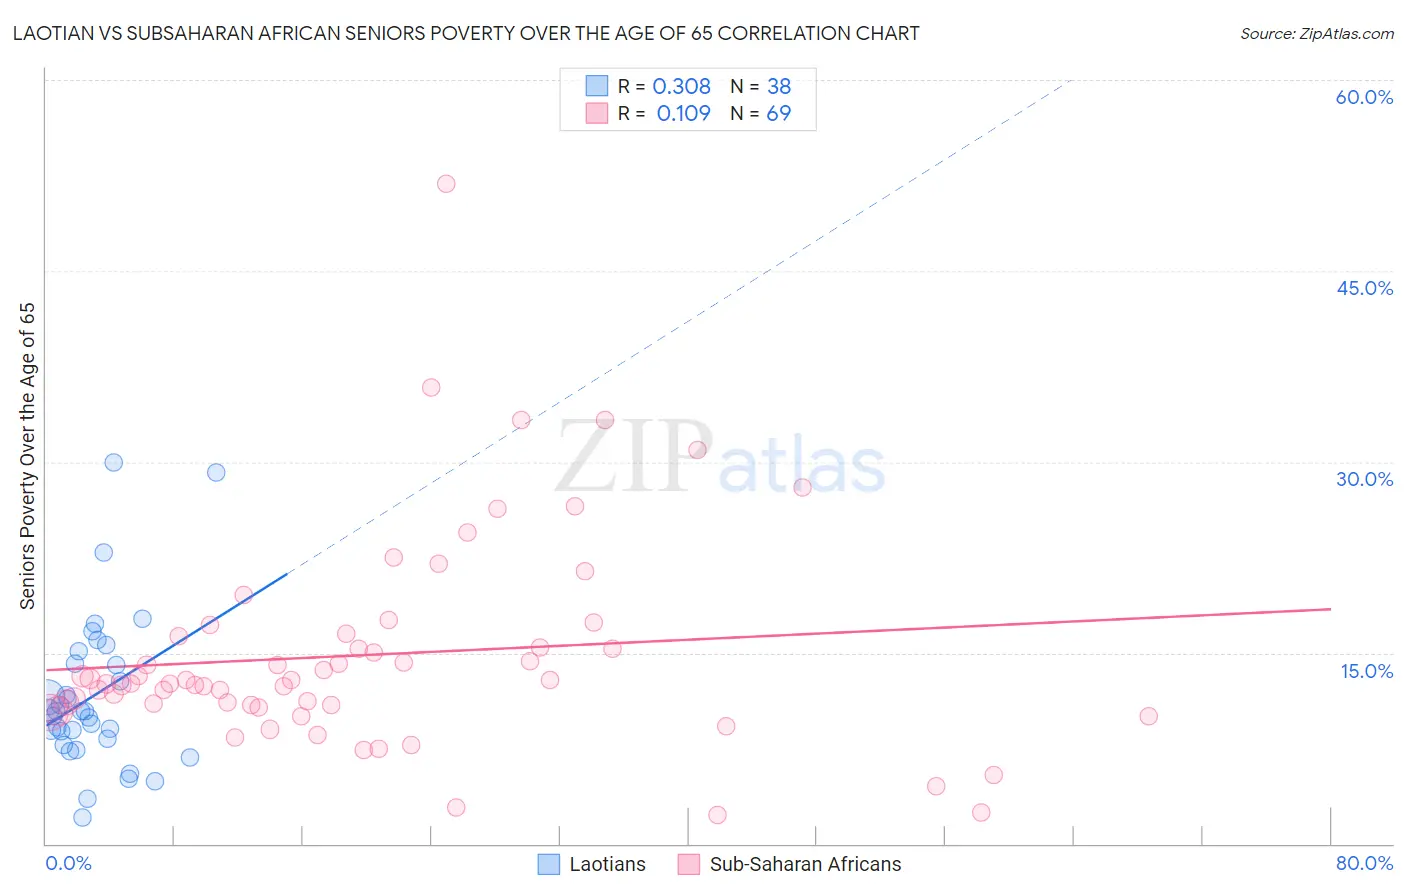 Laotian vs Subsaharan African Seniors Poverty Over the Age of 65